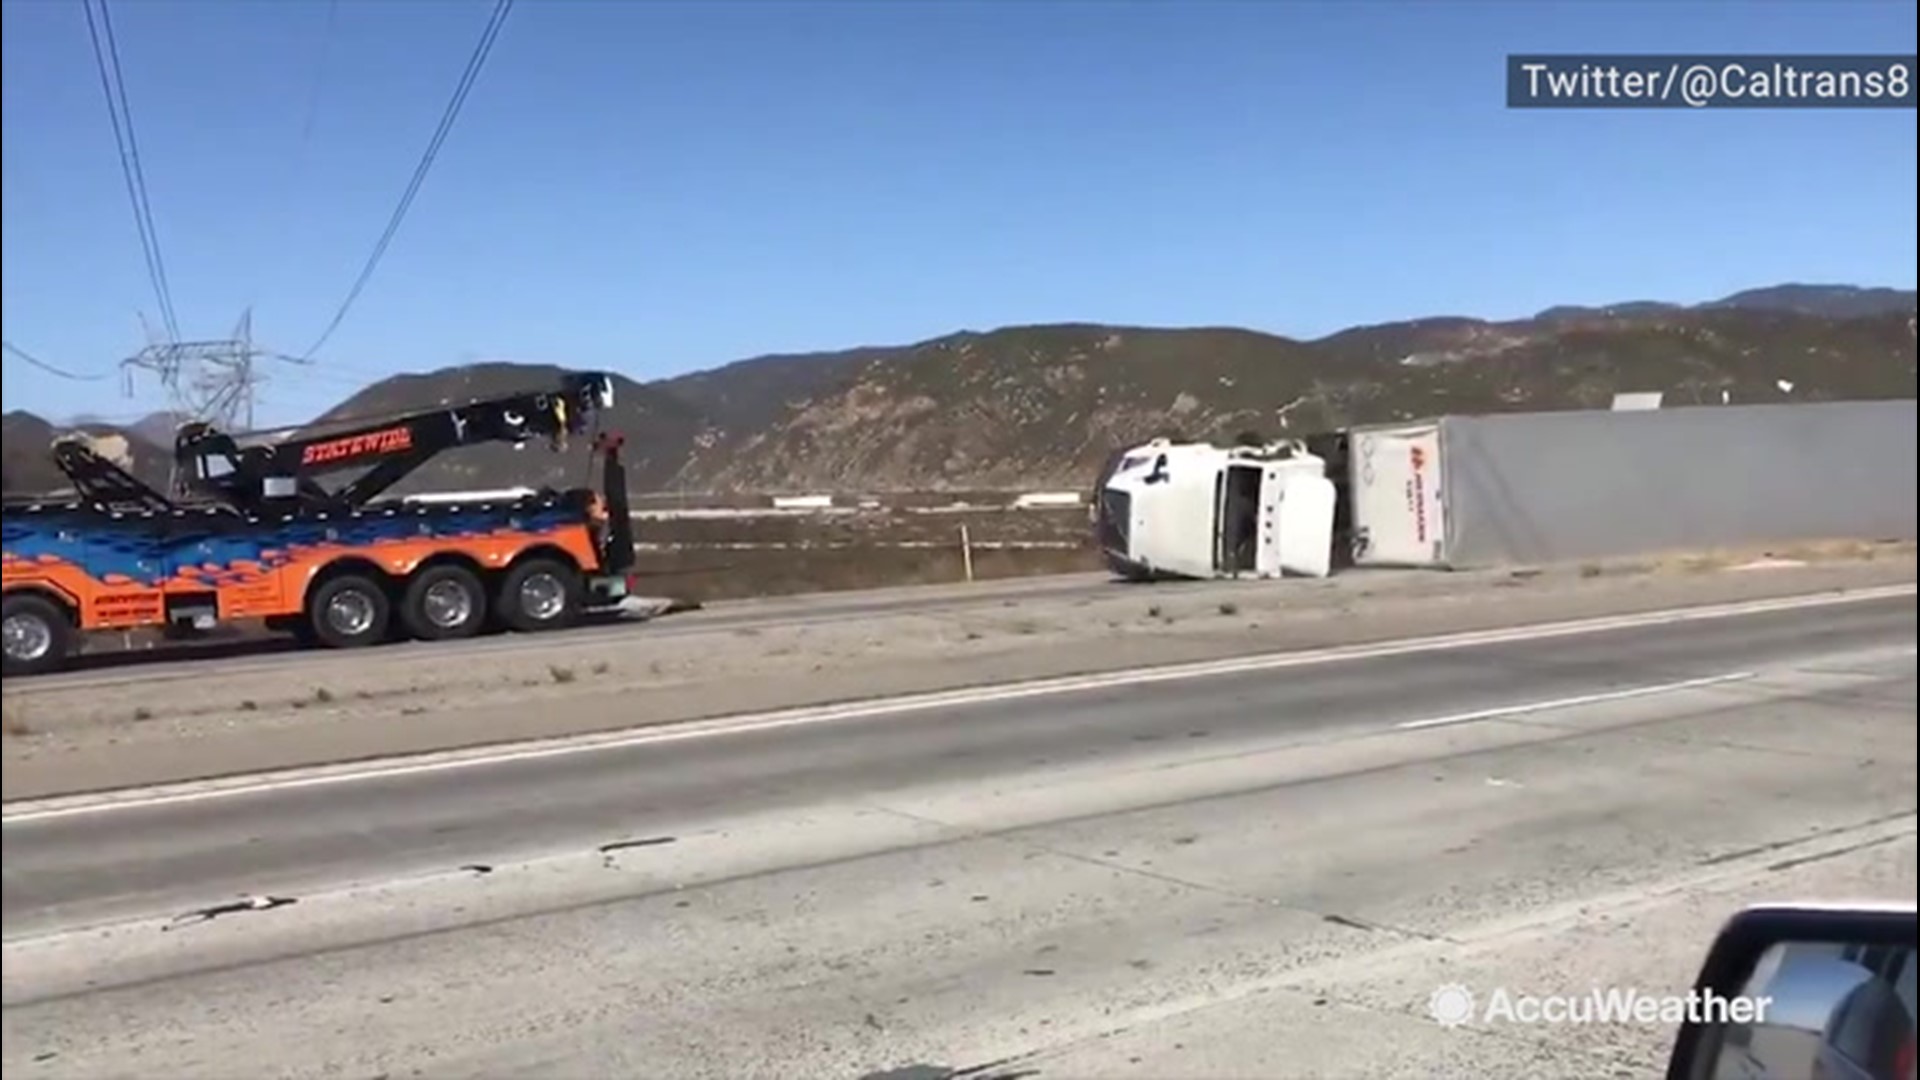 On Oct. 30, winds as high as 80 mph tipped over two tractor-trailers near Fontana, California. After a lot of hard work, crews were able to get one of the trailers off the highway and another pushed off to the side.